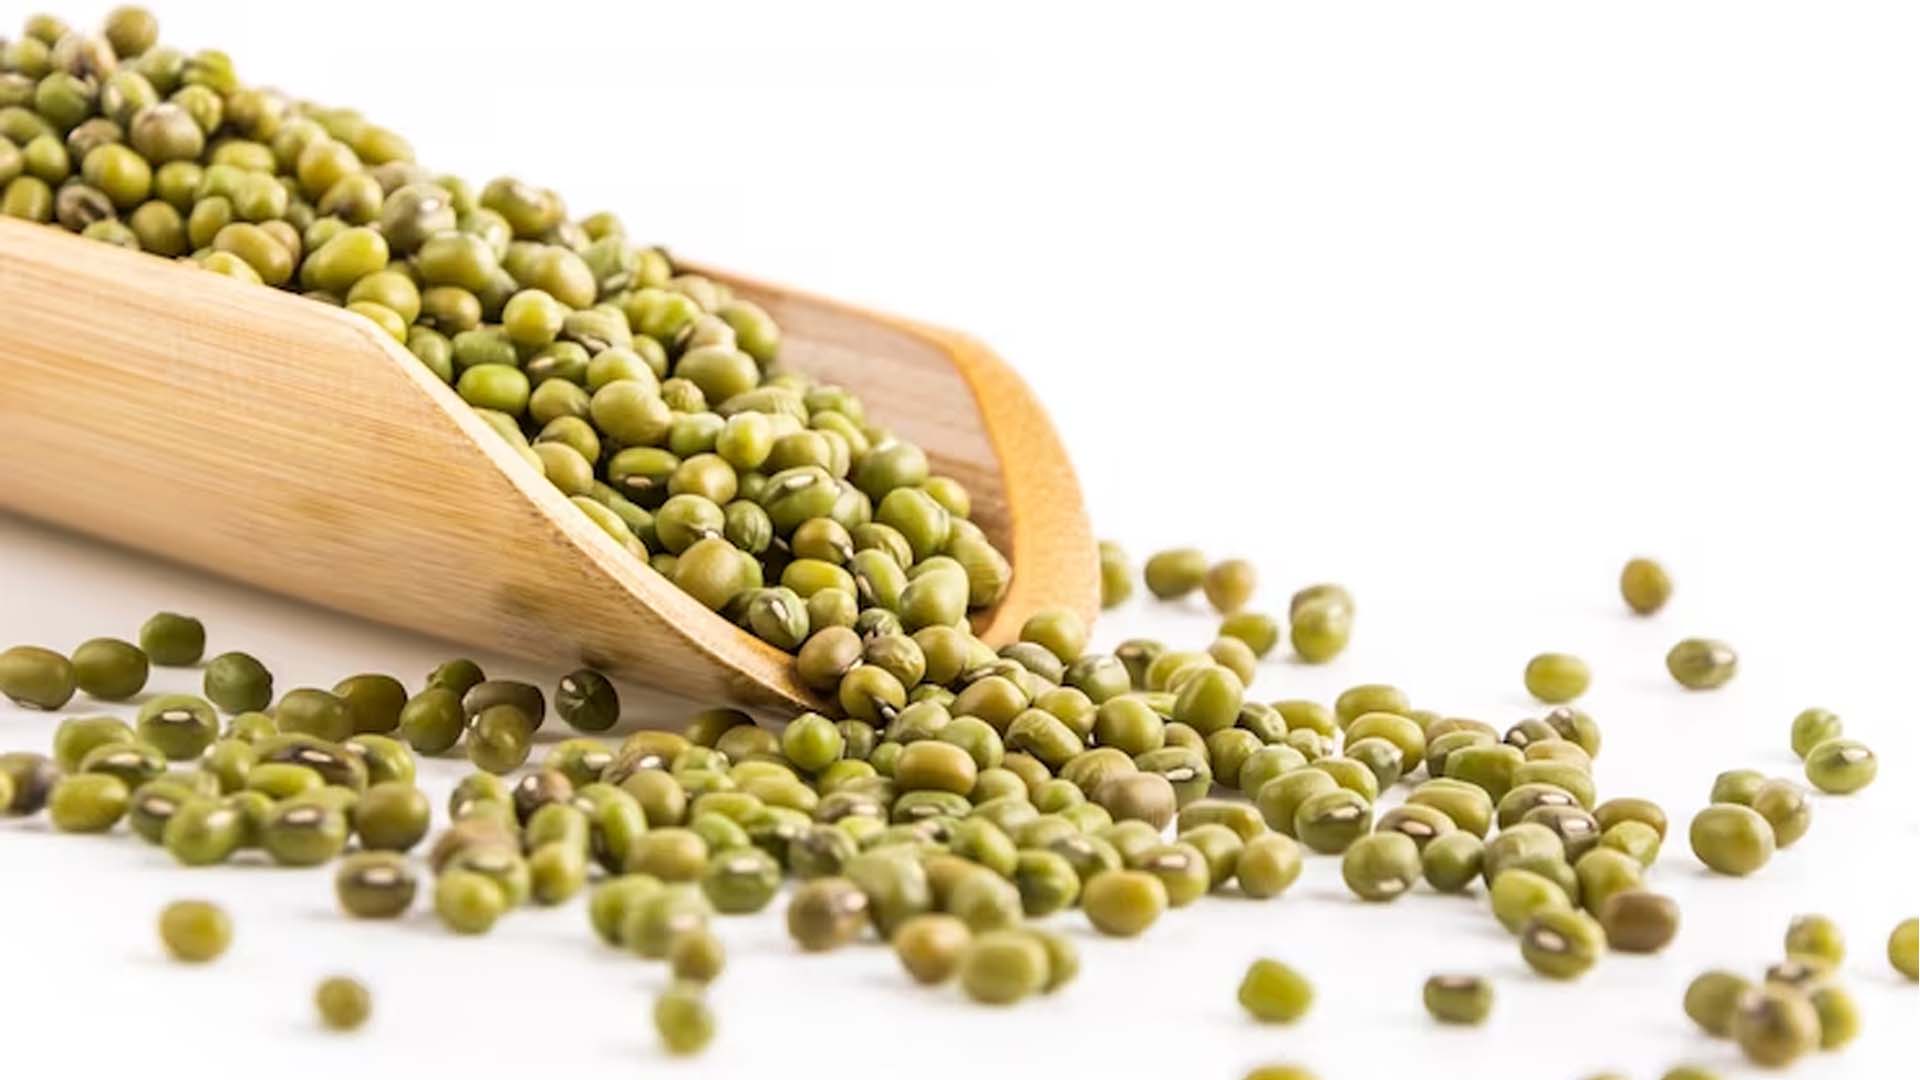 Nutritional Value of Mung Beans